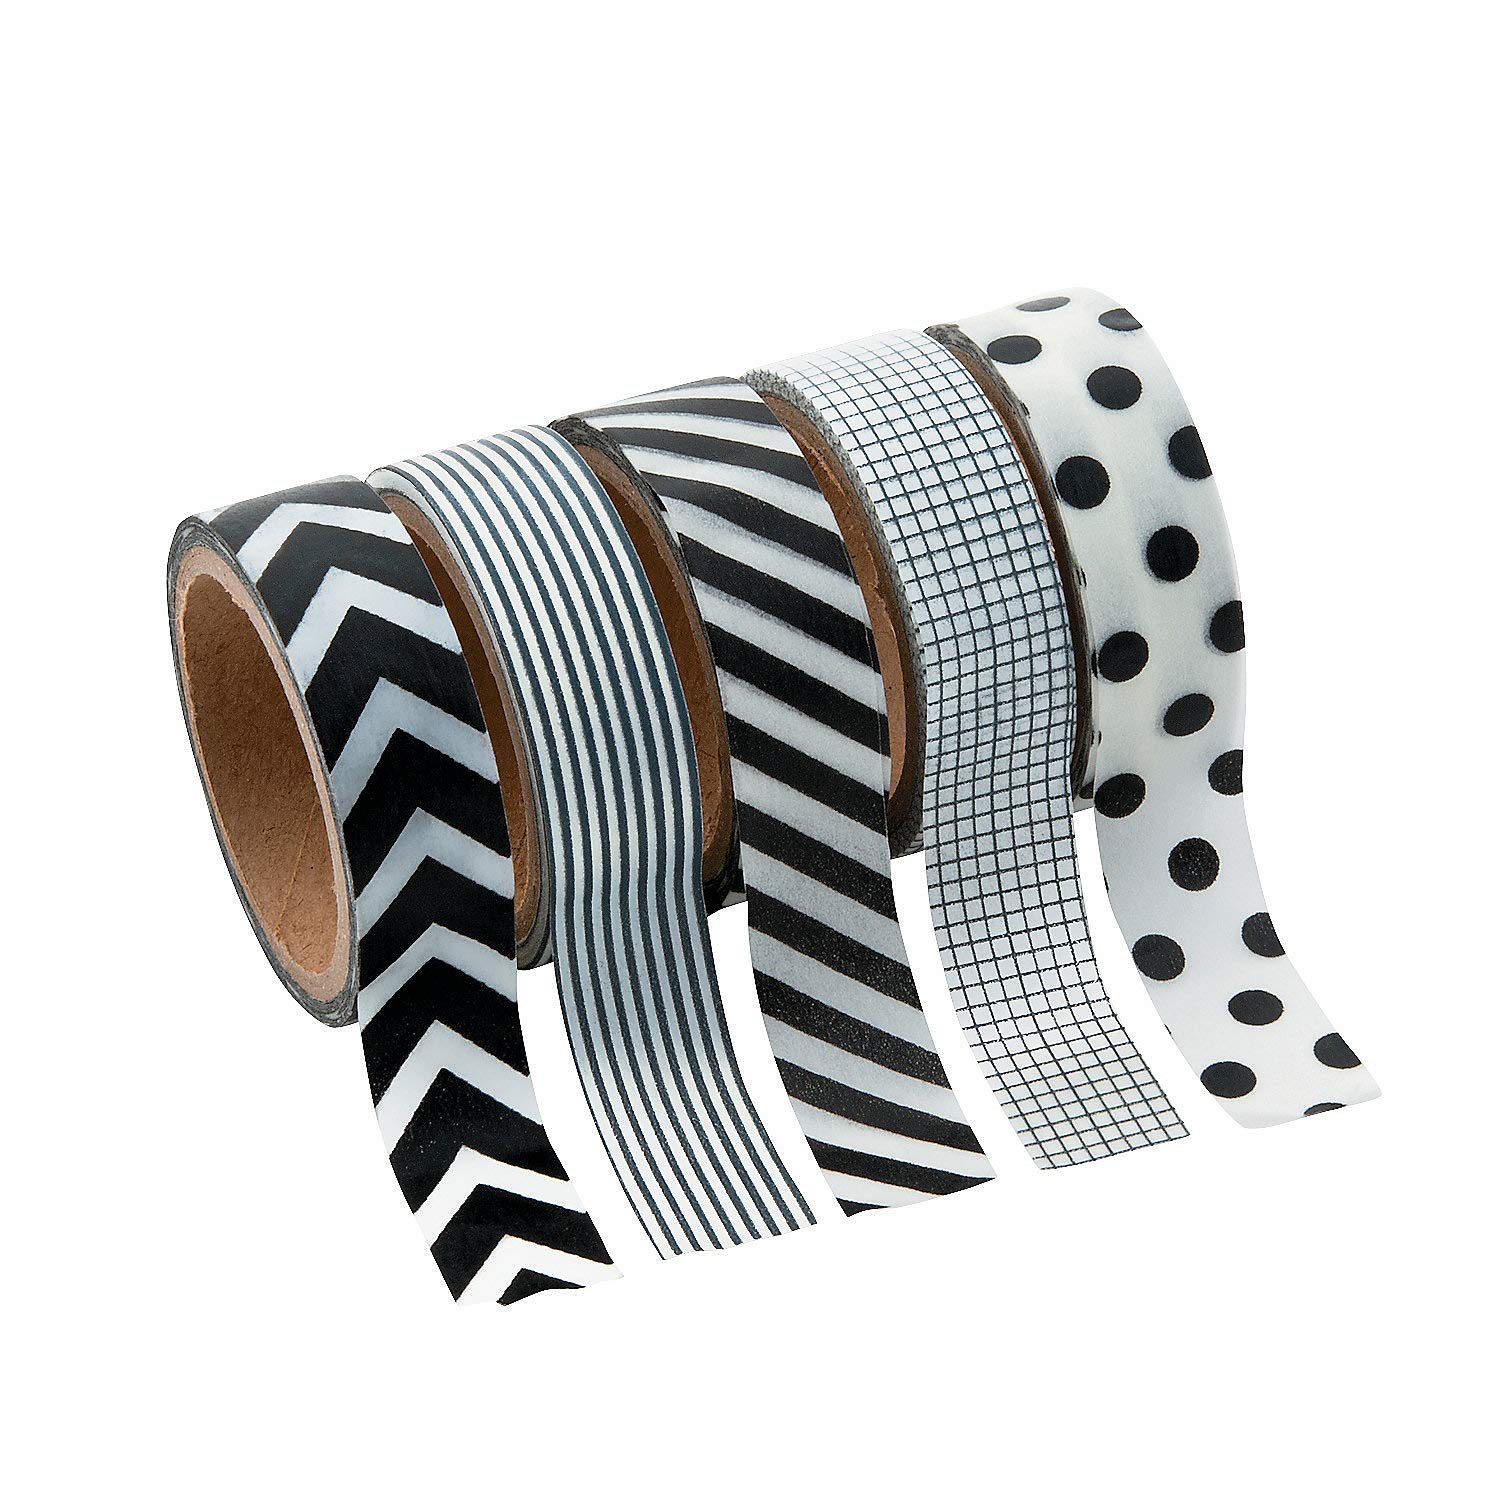 Book Cover Black & White Patterned Washi Tape Set (5 Rolls Per Unit) Each Roll Includes 16 Ft. Of Tape.